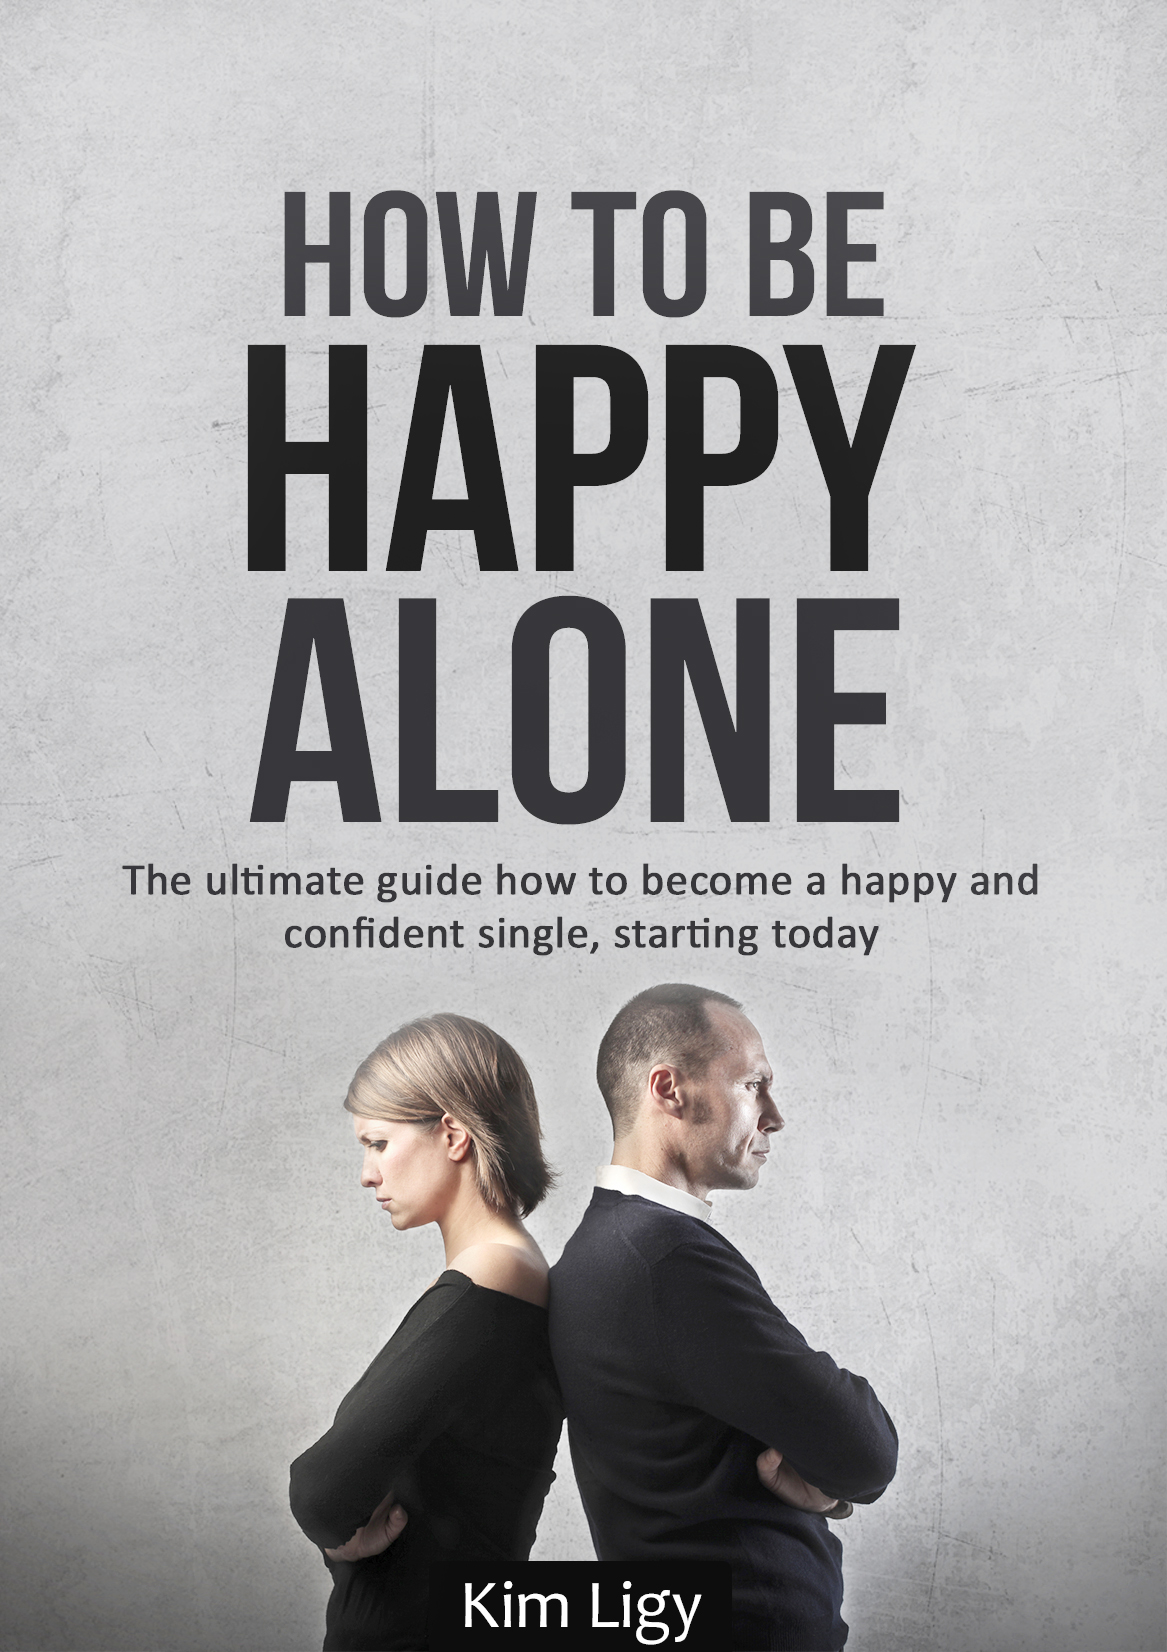 FREE: How To Be Happy Alone: The Ultimate Guide How To Become a Happy and Confident Single, Starting Today by Anton Kimfors